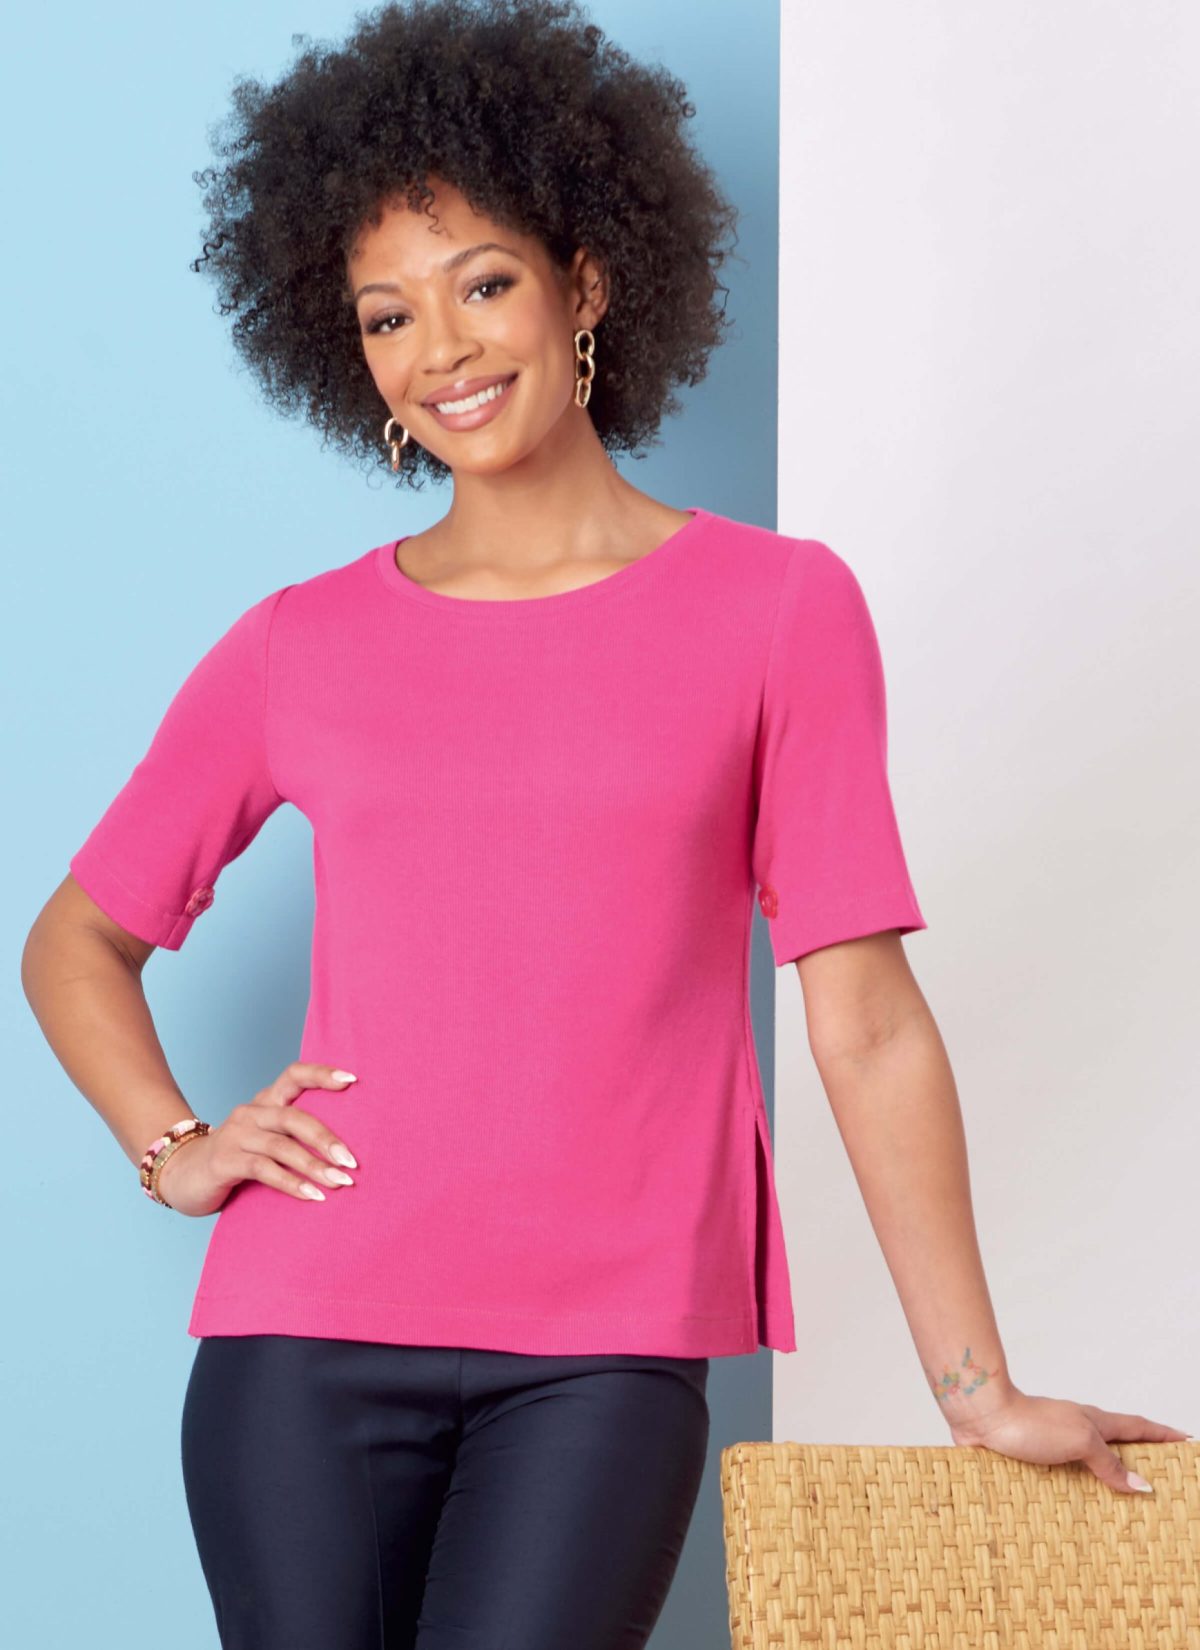 Butterick Sewing Pattern B6874 Misses' Knit Tops